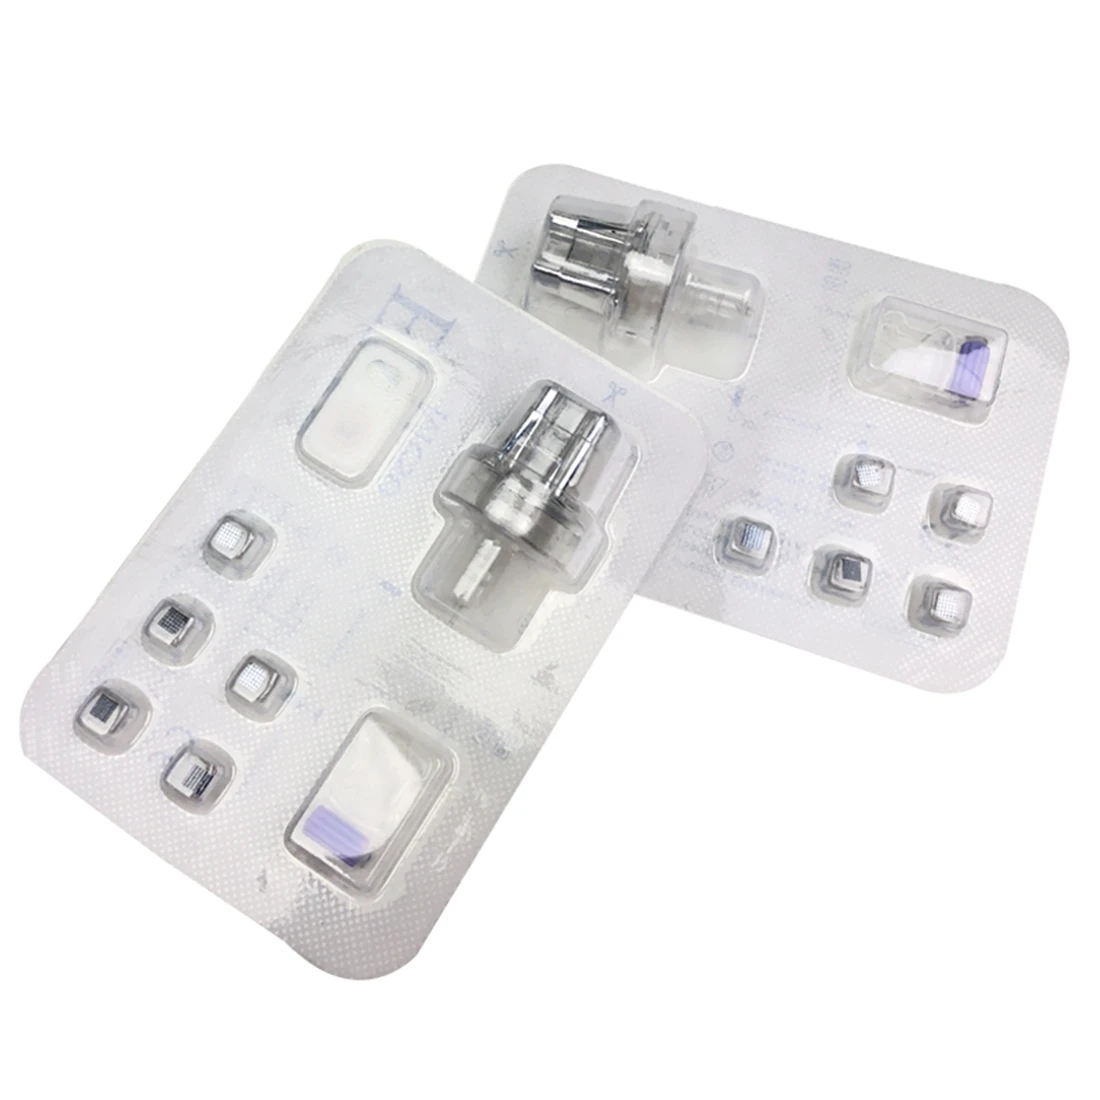 

EMS Monocrystalline Silicon Chip Replacement Head 1 Set for Injector Mesotherapy Gun Needle Free Injection Moisturizing Mesogun